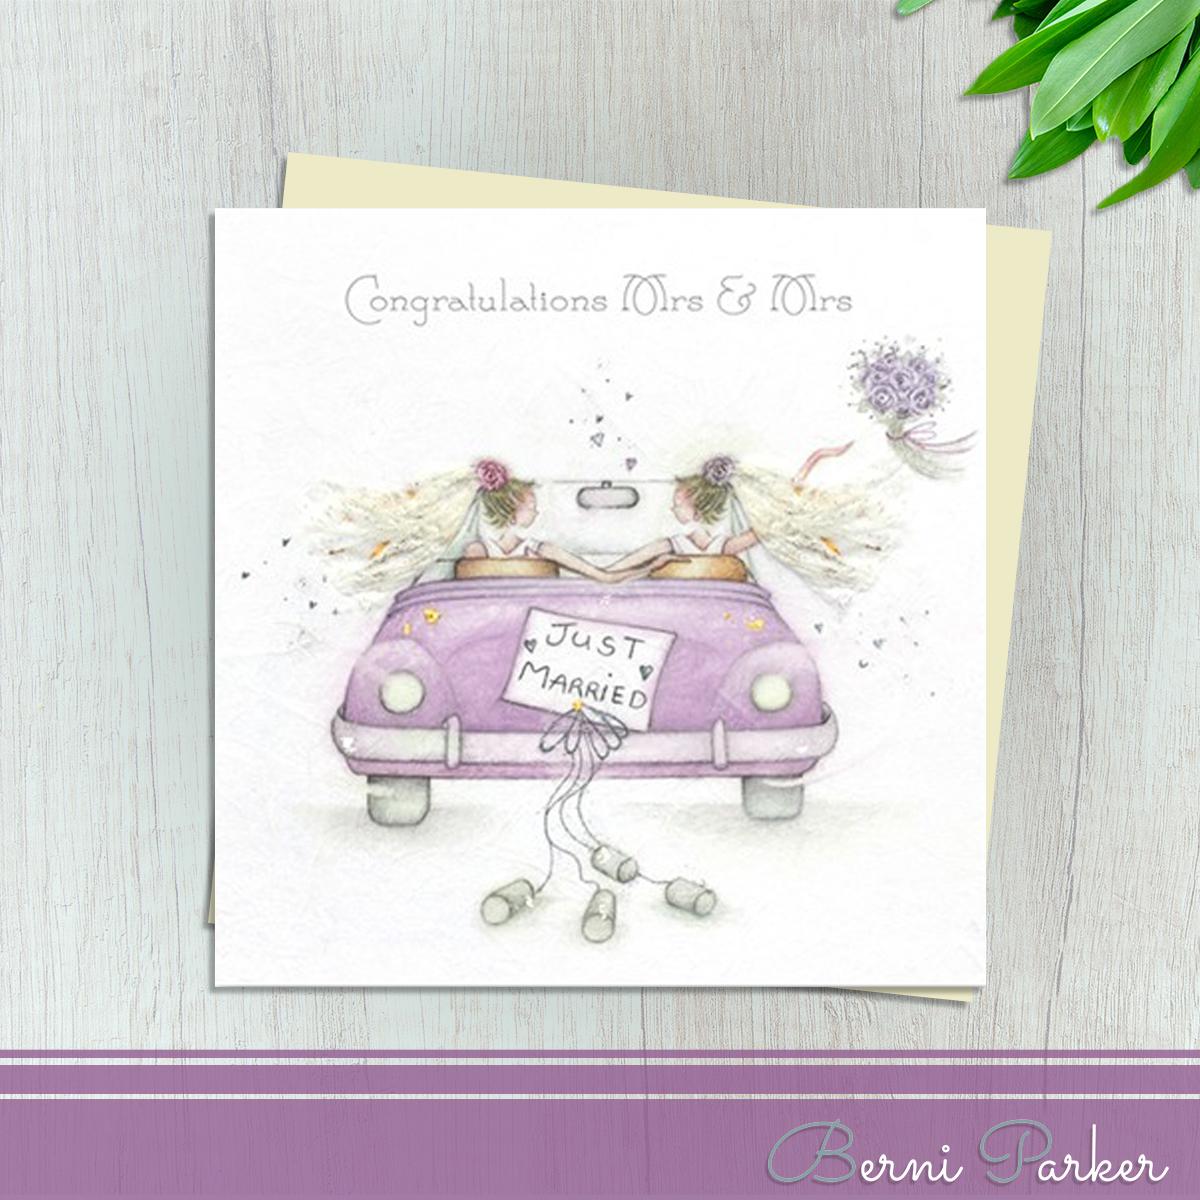 Congratulations Mrs And Mrs Wedding Day Card By Berni Parker Designs. Showing Two Brides In Their Wedding Car. Finished With Silver Foil Accents And An Ivory Envelope